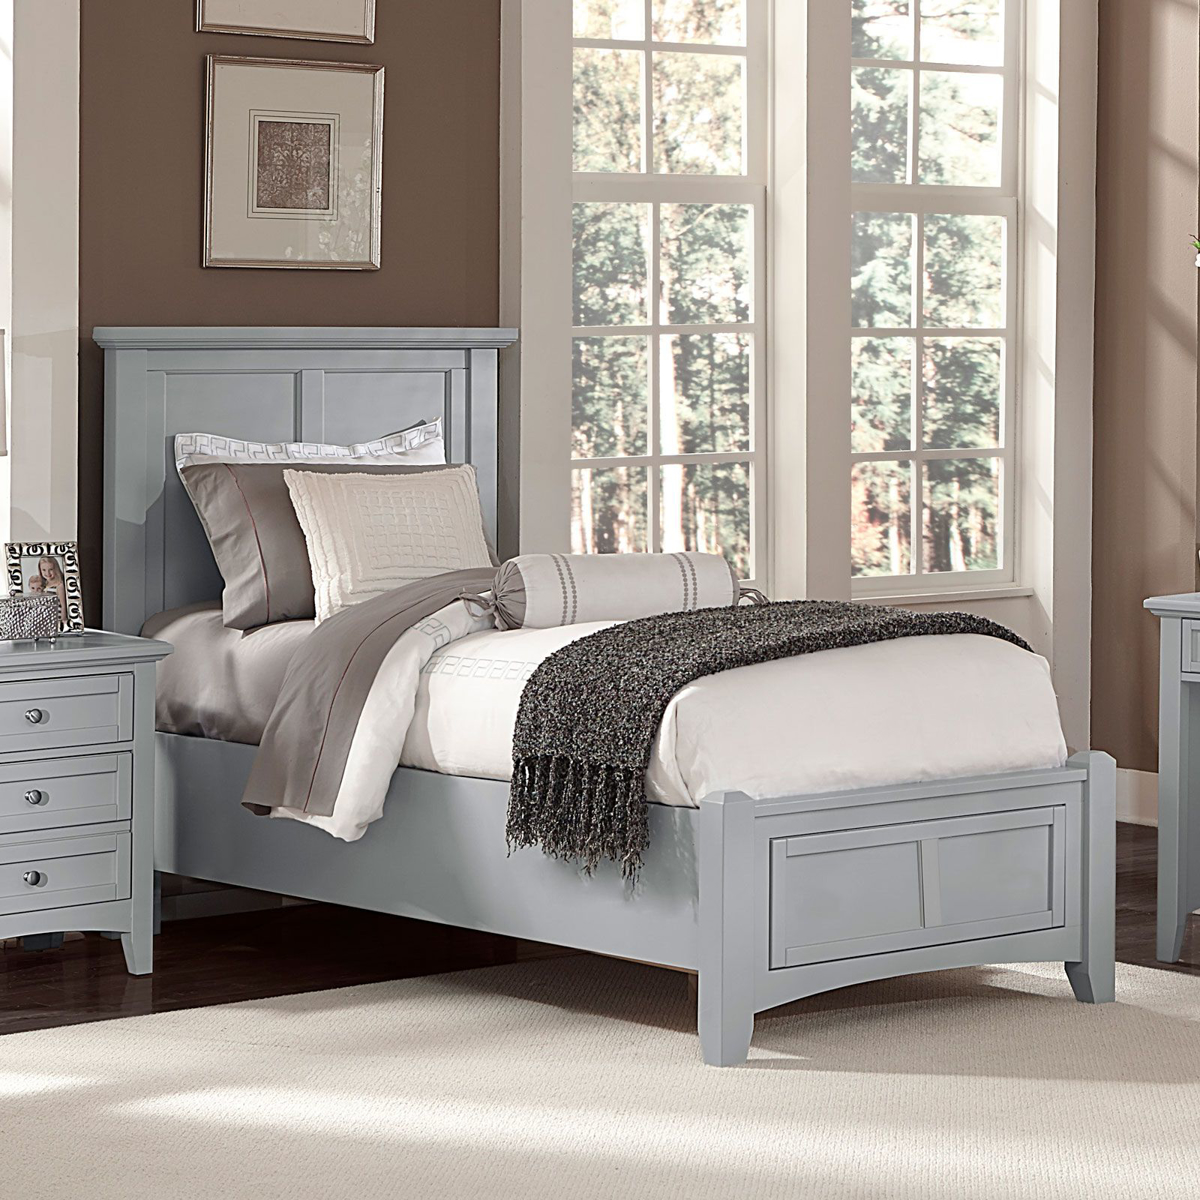 Picture of Gray Finish Twin Size Bed